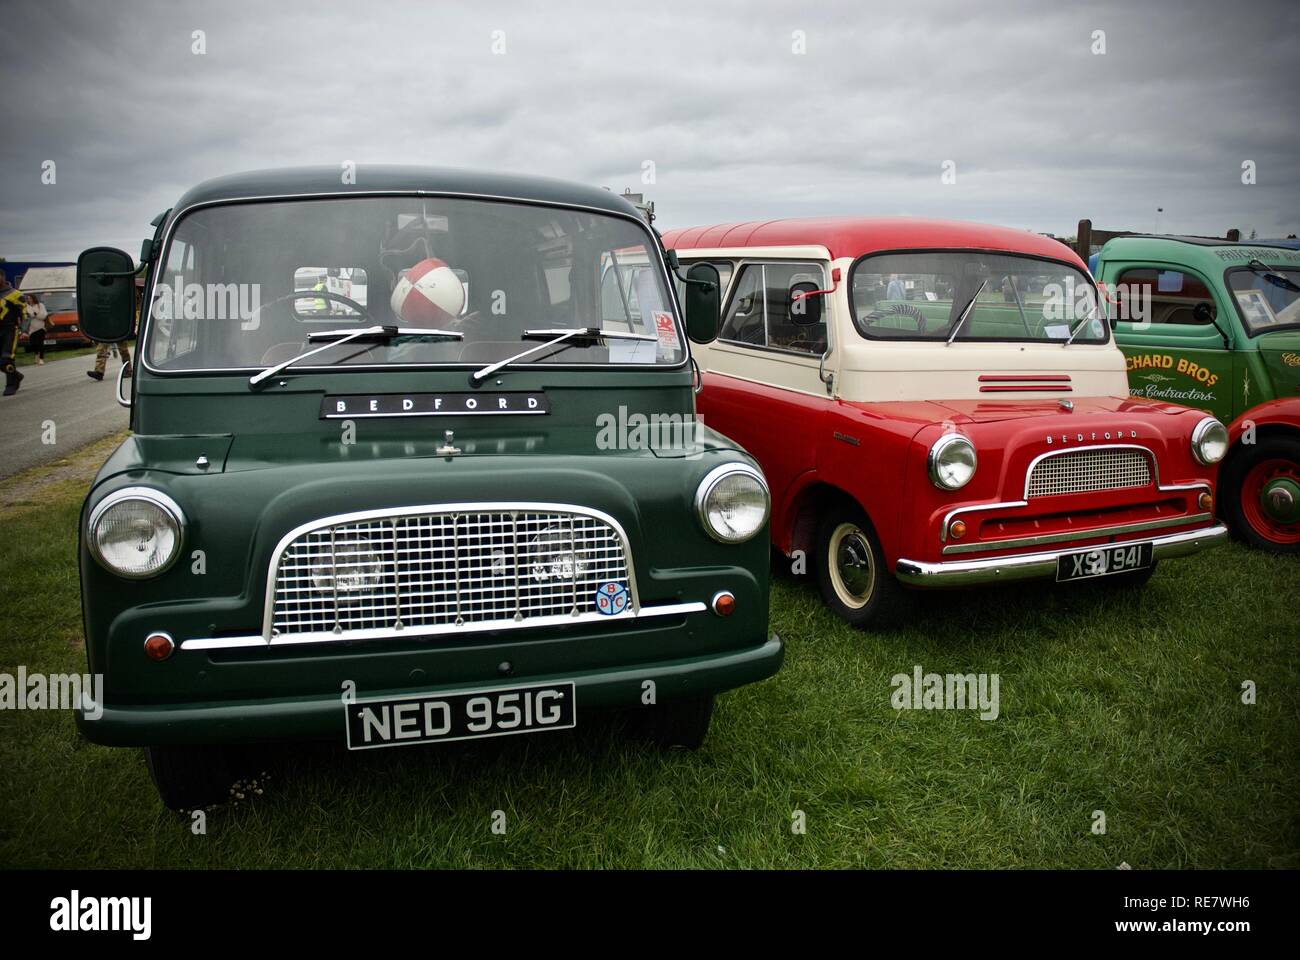 Bedford CA cars à l''Anglesey Vintage Rally, Anglesey, au nord du Pays de Galles, Royaume-Uni, mai 2015 Banque D'Images